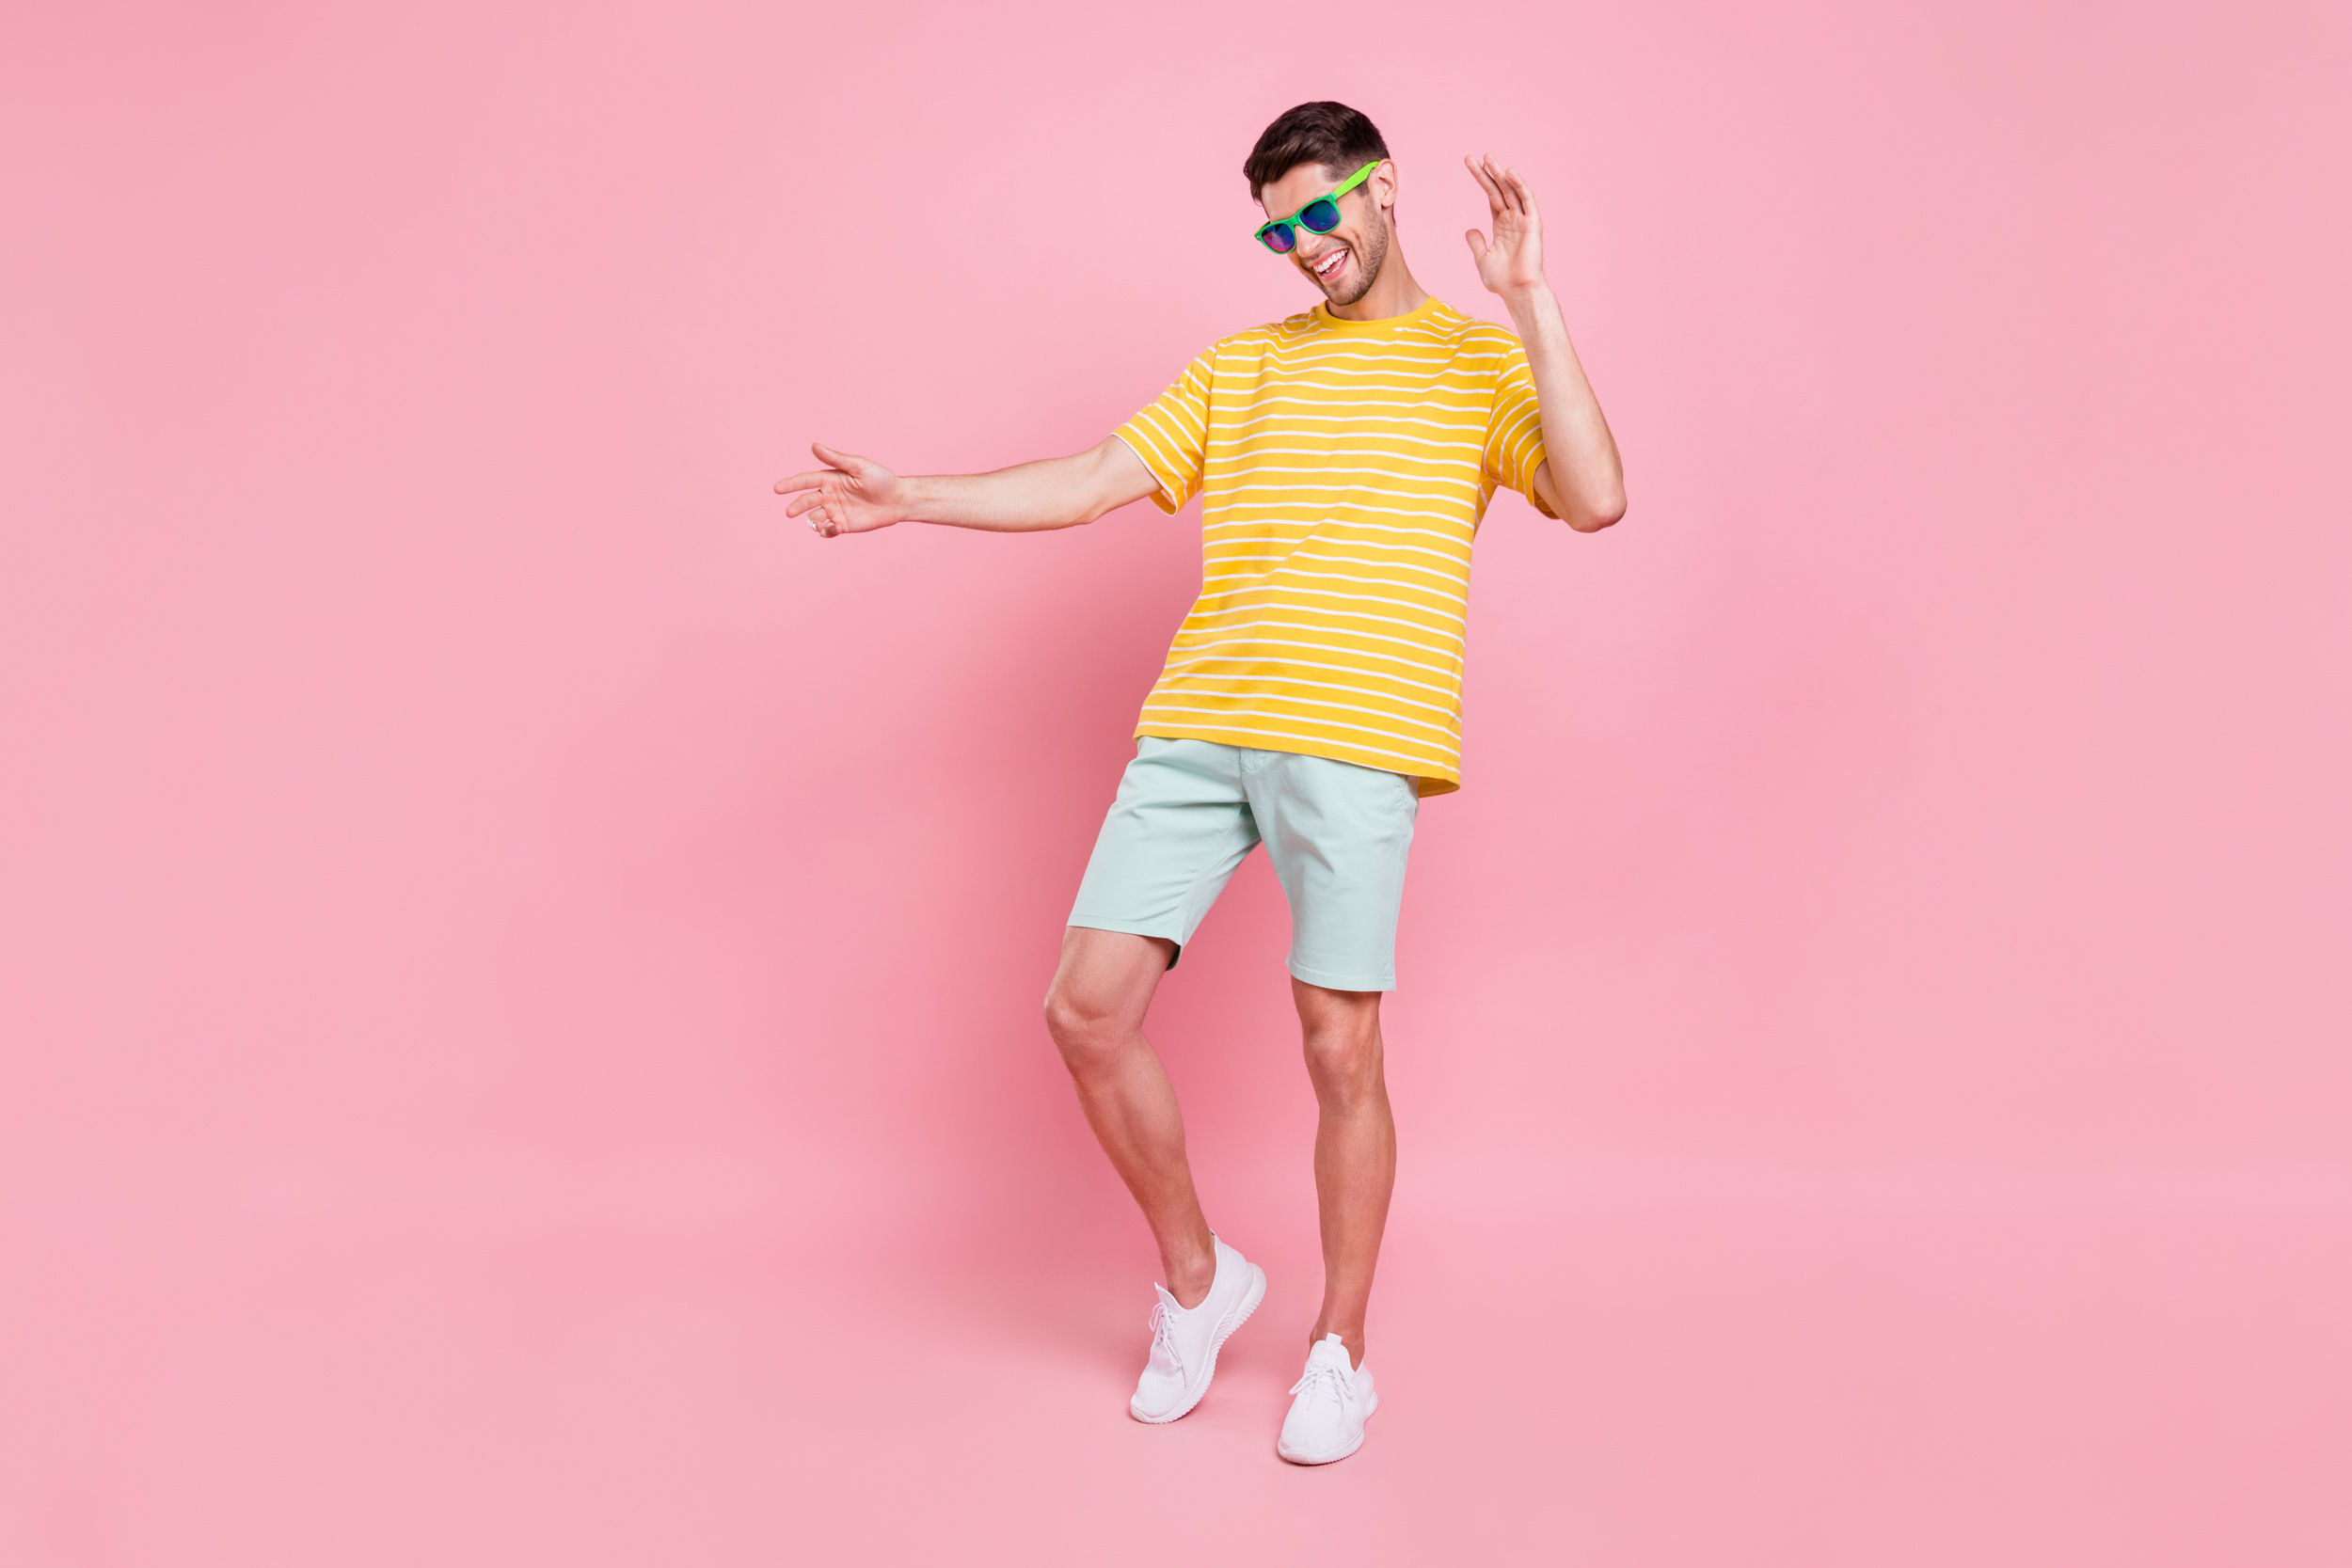 <p>Once temperatures break into the 70s (or 80s, if you’re from down South), Americans whip out the summer wardrobe, typically full of shorts. However, elsewhere in the world, these are saved exclusively for beach days and can even be considered inappropriate depending on the length and what country you’re visiting.</p><p>You may also like: <a href='https://www.yardbarker.com/lifestyle/articles/15_things_you_should_eat_in_the_pacific_northwest_041024/s1__38261249'>15 things you should eat in the Pacific Northwest</a></p>